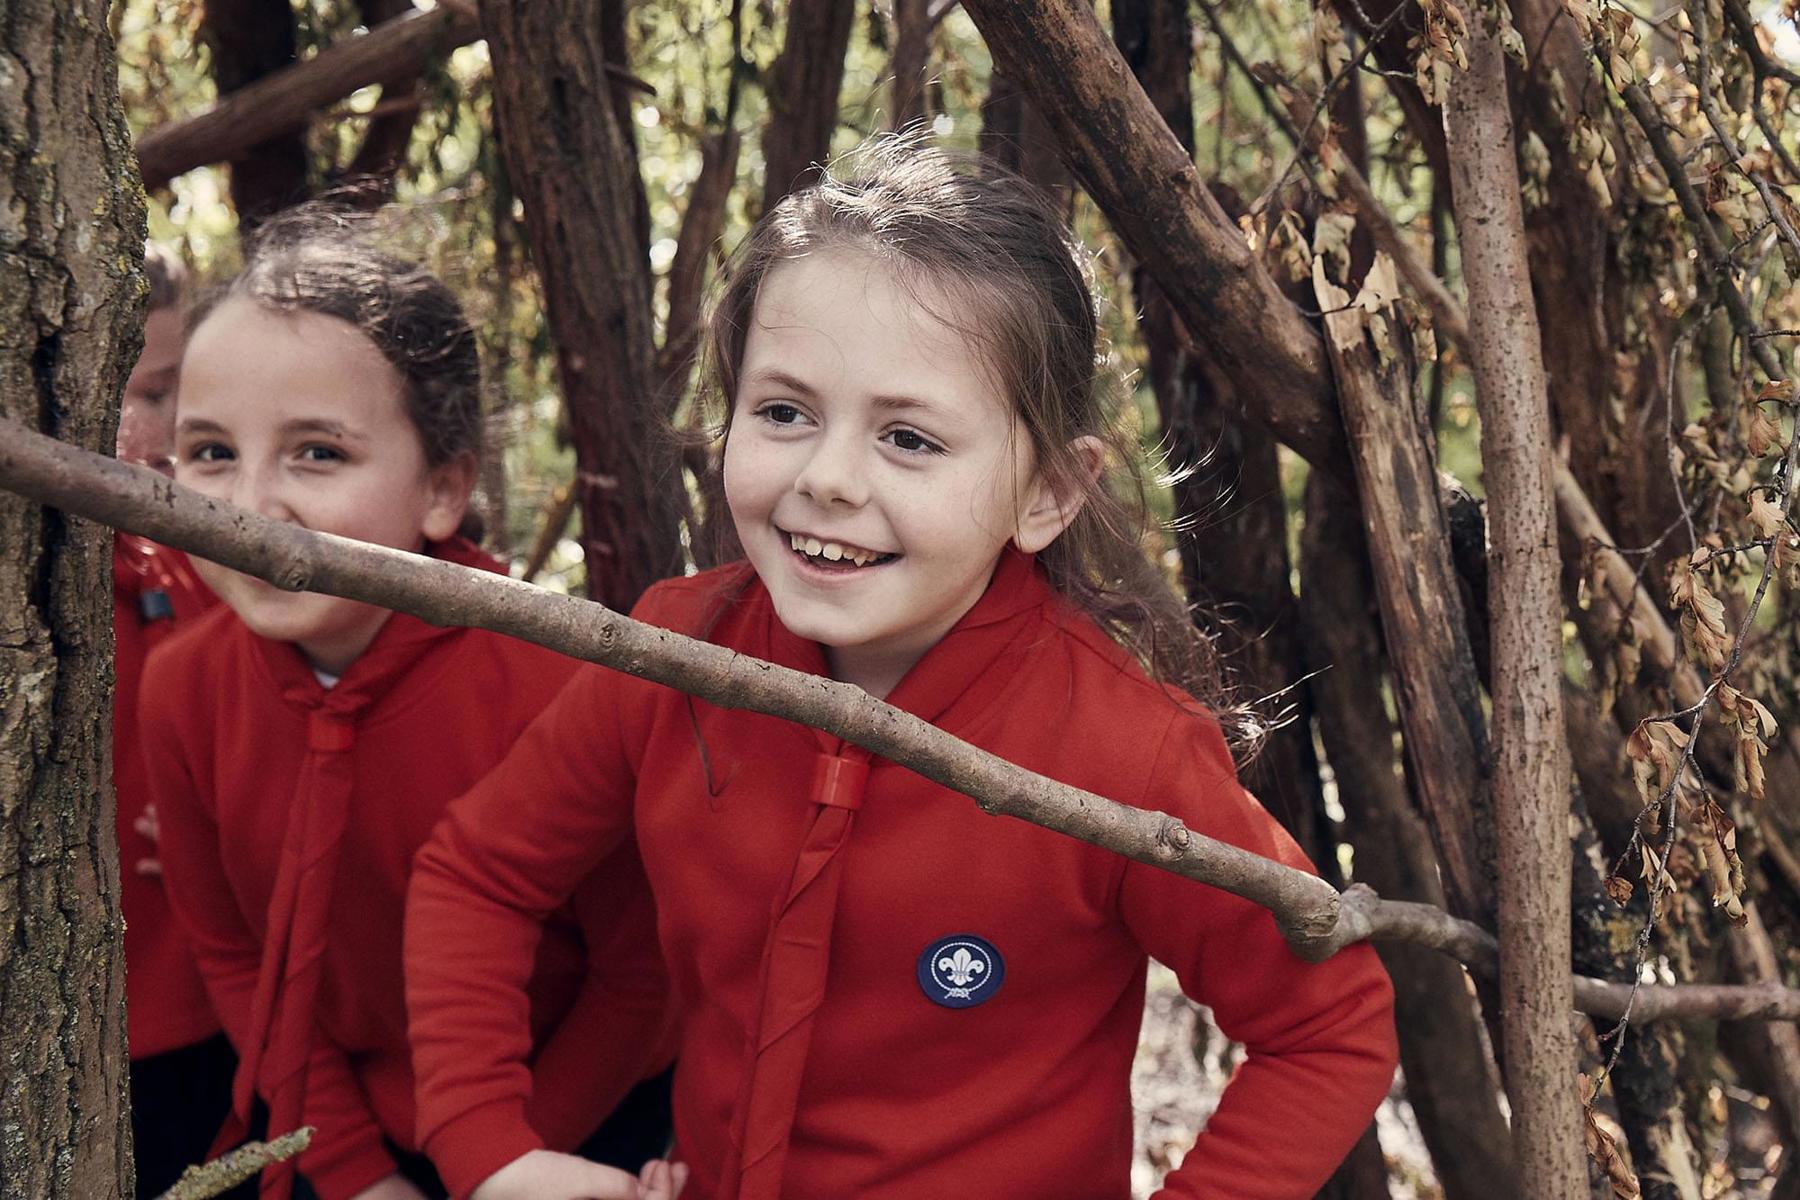 Two girls, who are in Squirrel uniform, are sat in their outdoor den and smiling at the camera. They're surrounded by branches, leaves and tress while sat inside the den.